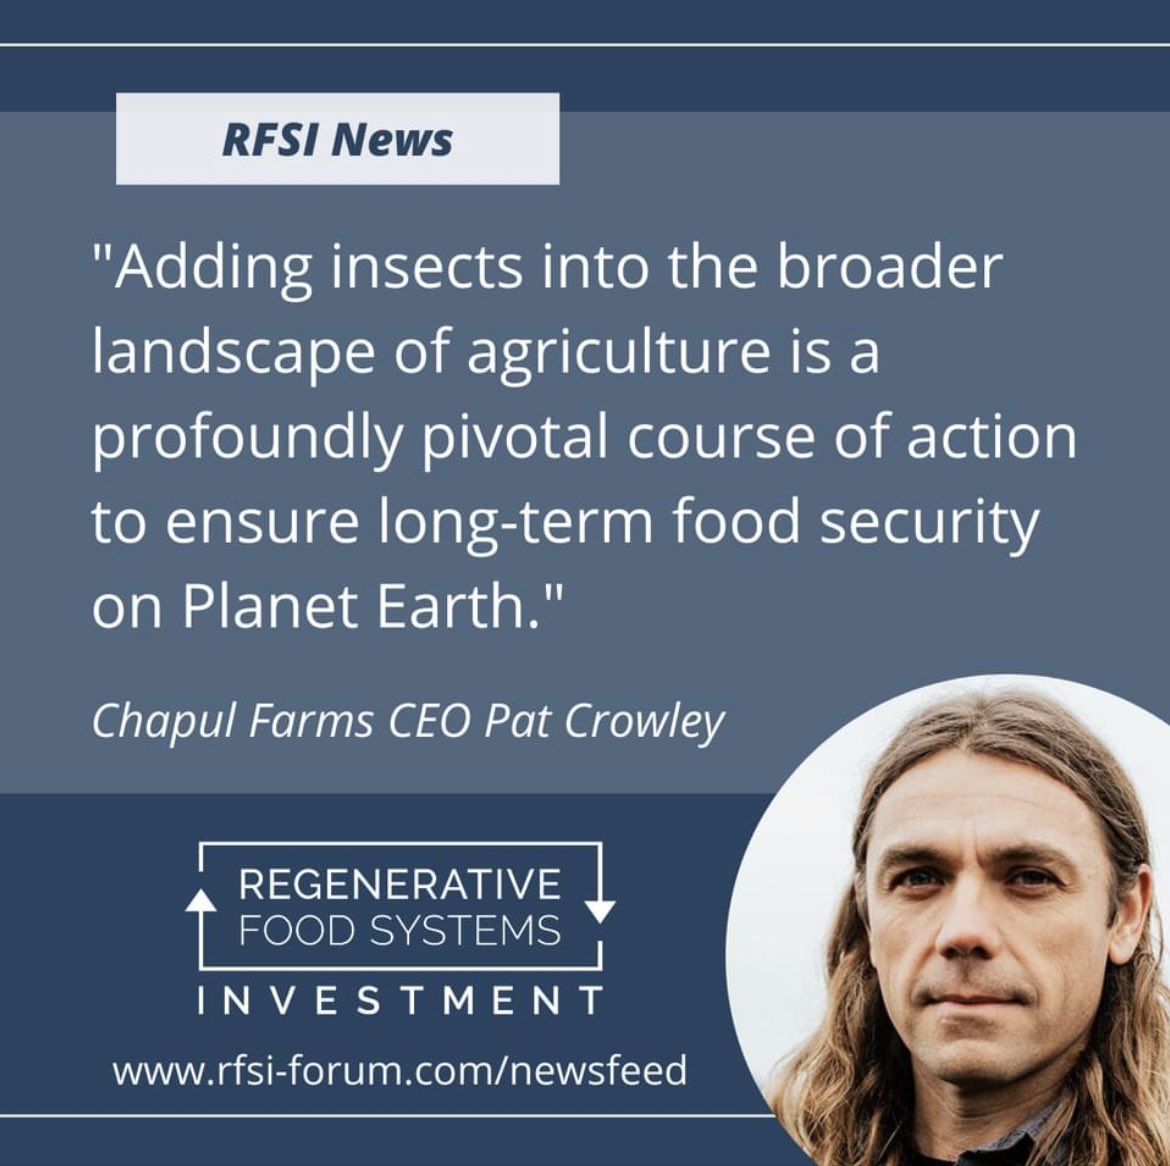 “If you missed the breaking news, @ChapulFarms announced $2.5M in seed fundraising and a partnership with @Nexus_PMG to launch Chapul Farms, an end-to-end, regenerative insect agriculture project development company.” 
 
Read more @Invest_RegenAg - bit.ly/3L1T3dJ